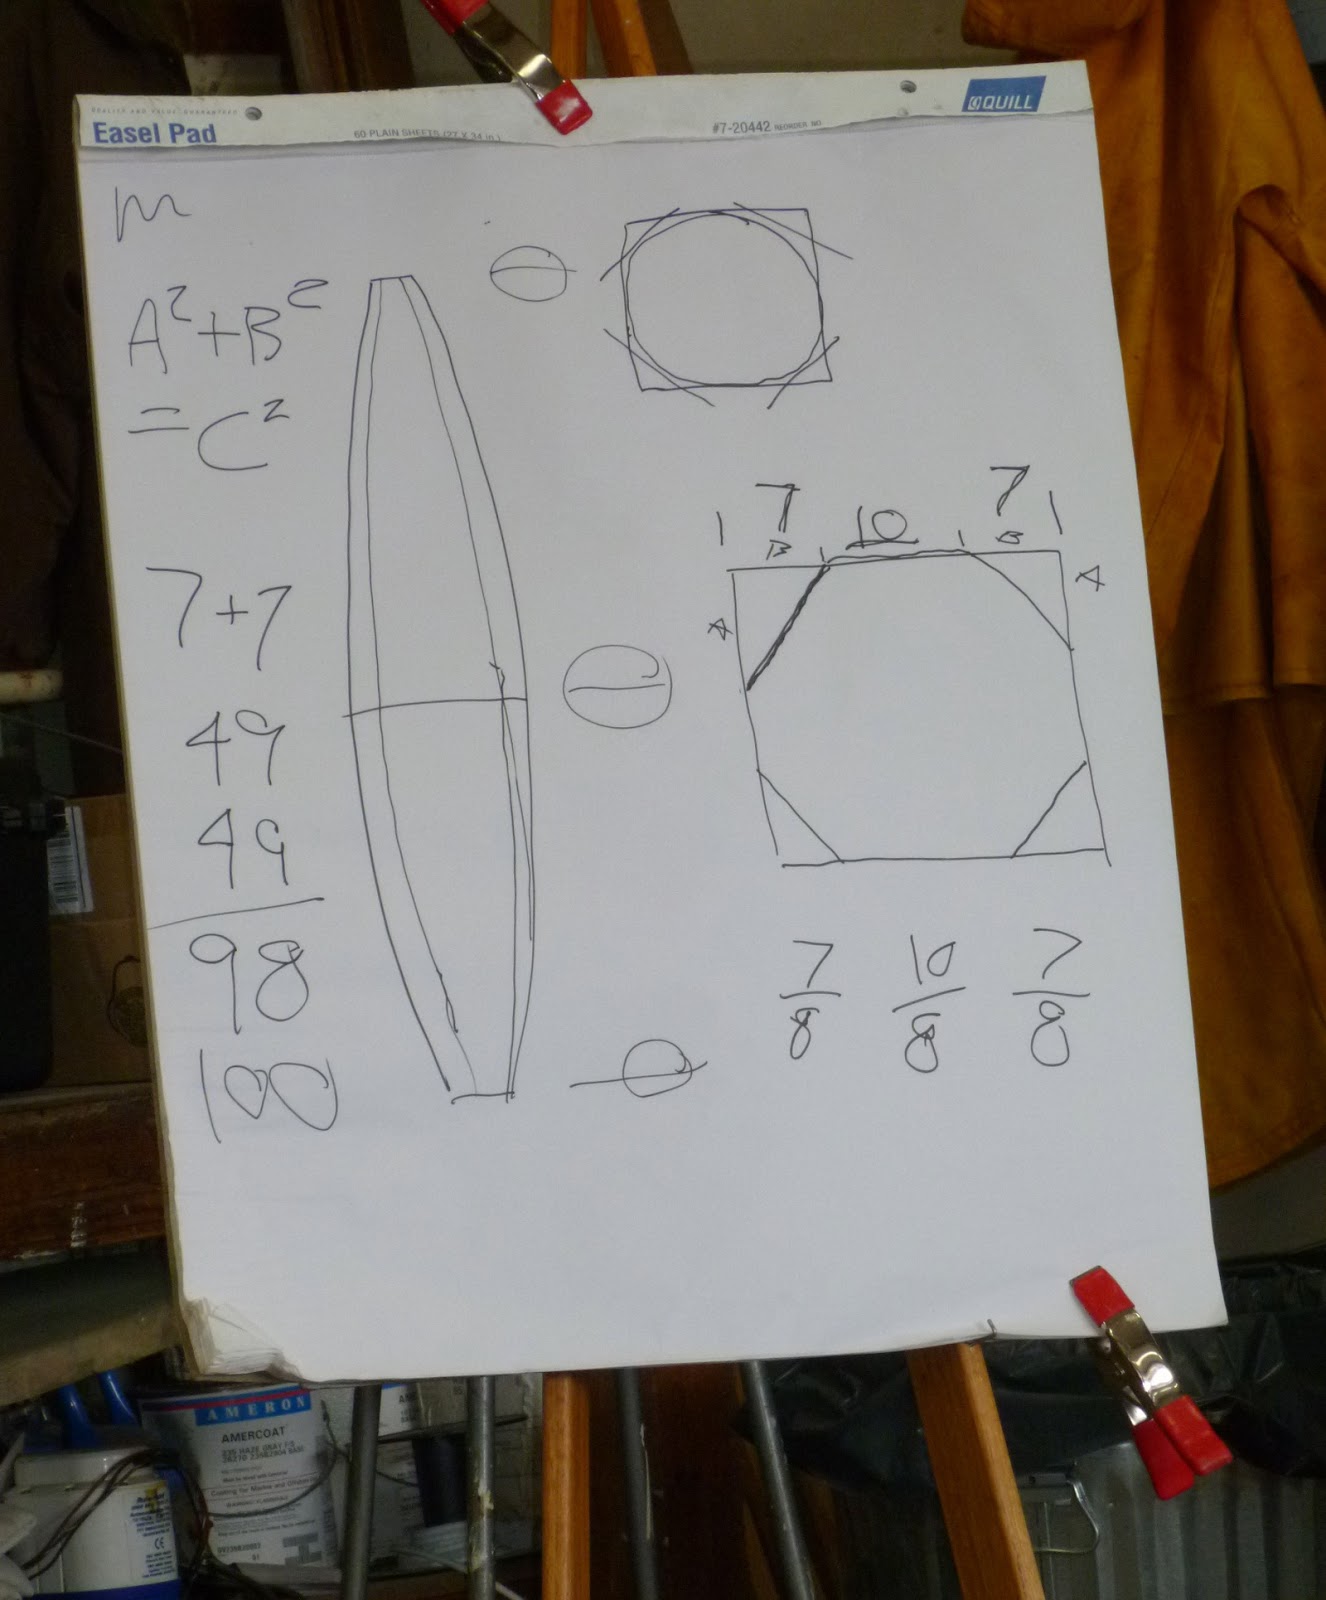 Boat builders' math it not really the same kind of math they taught us ...